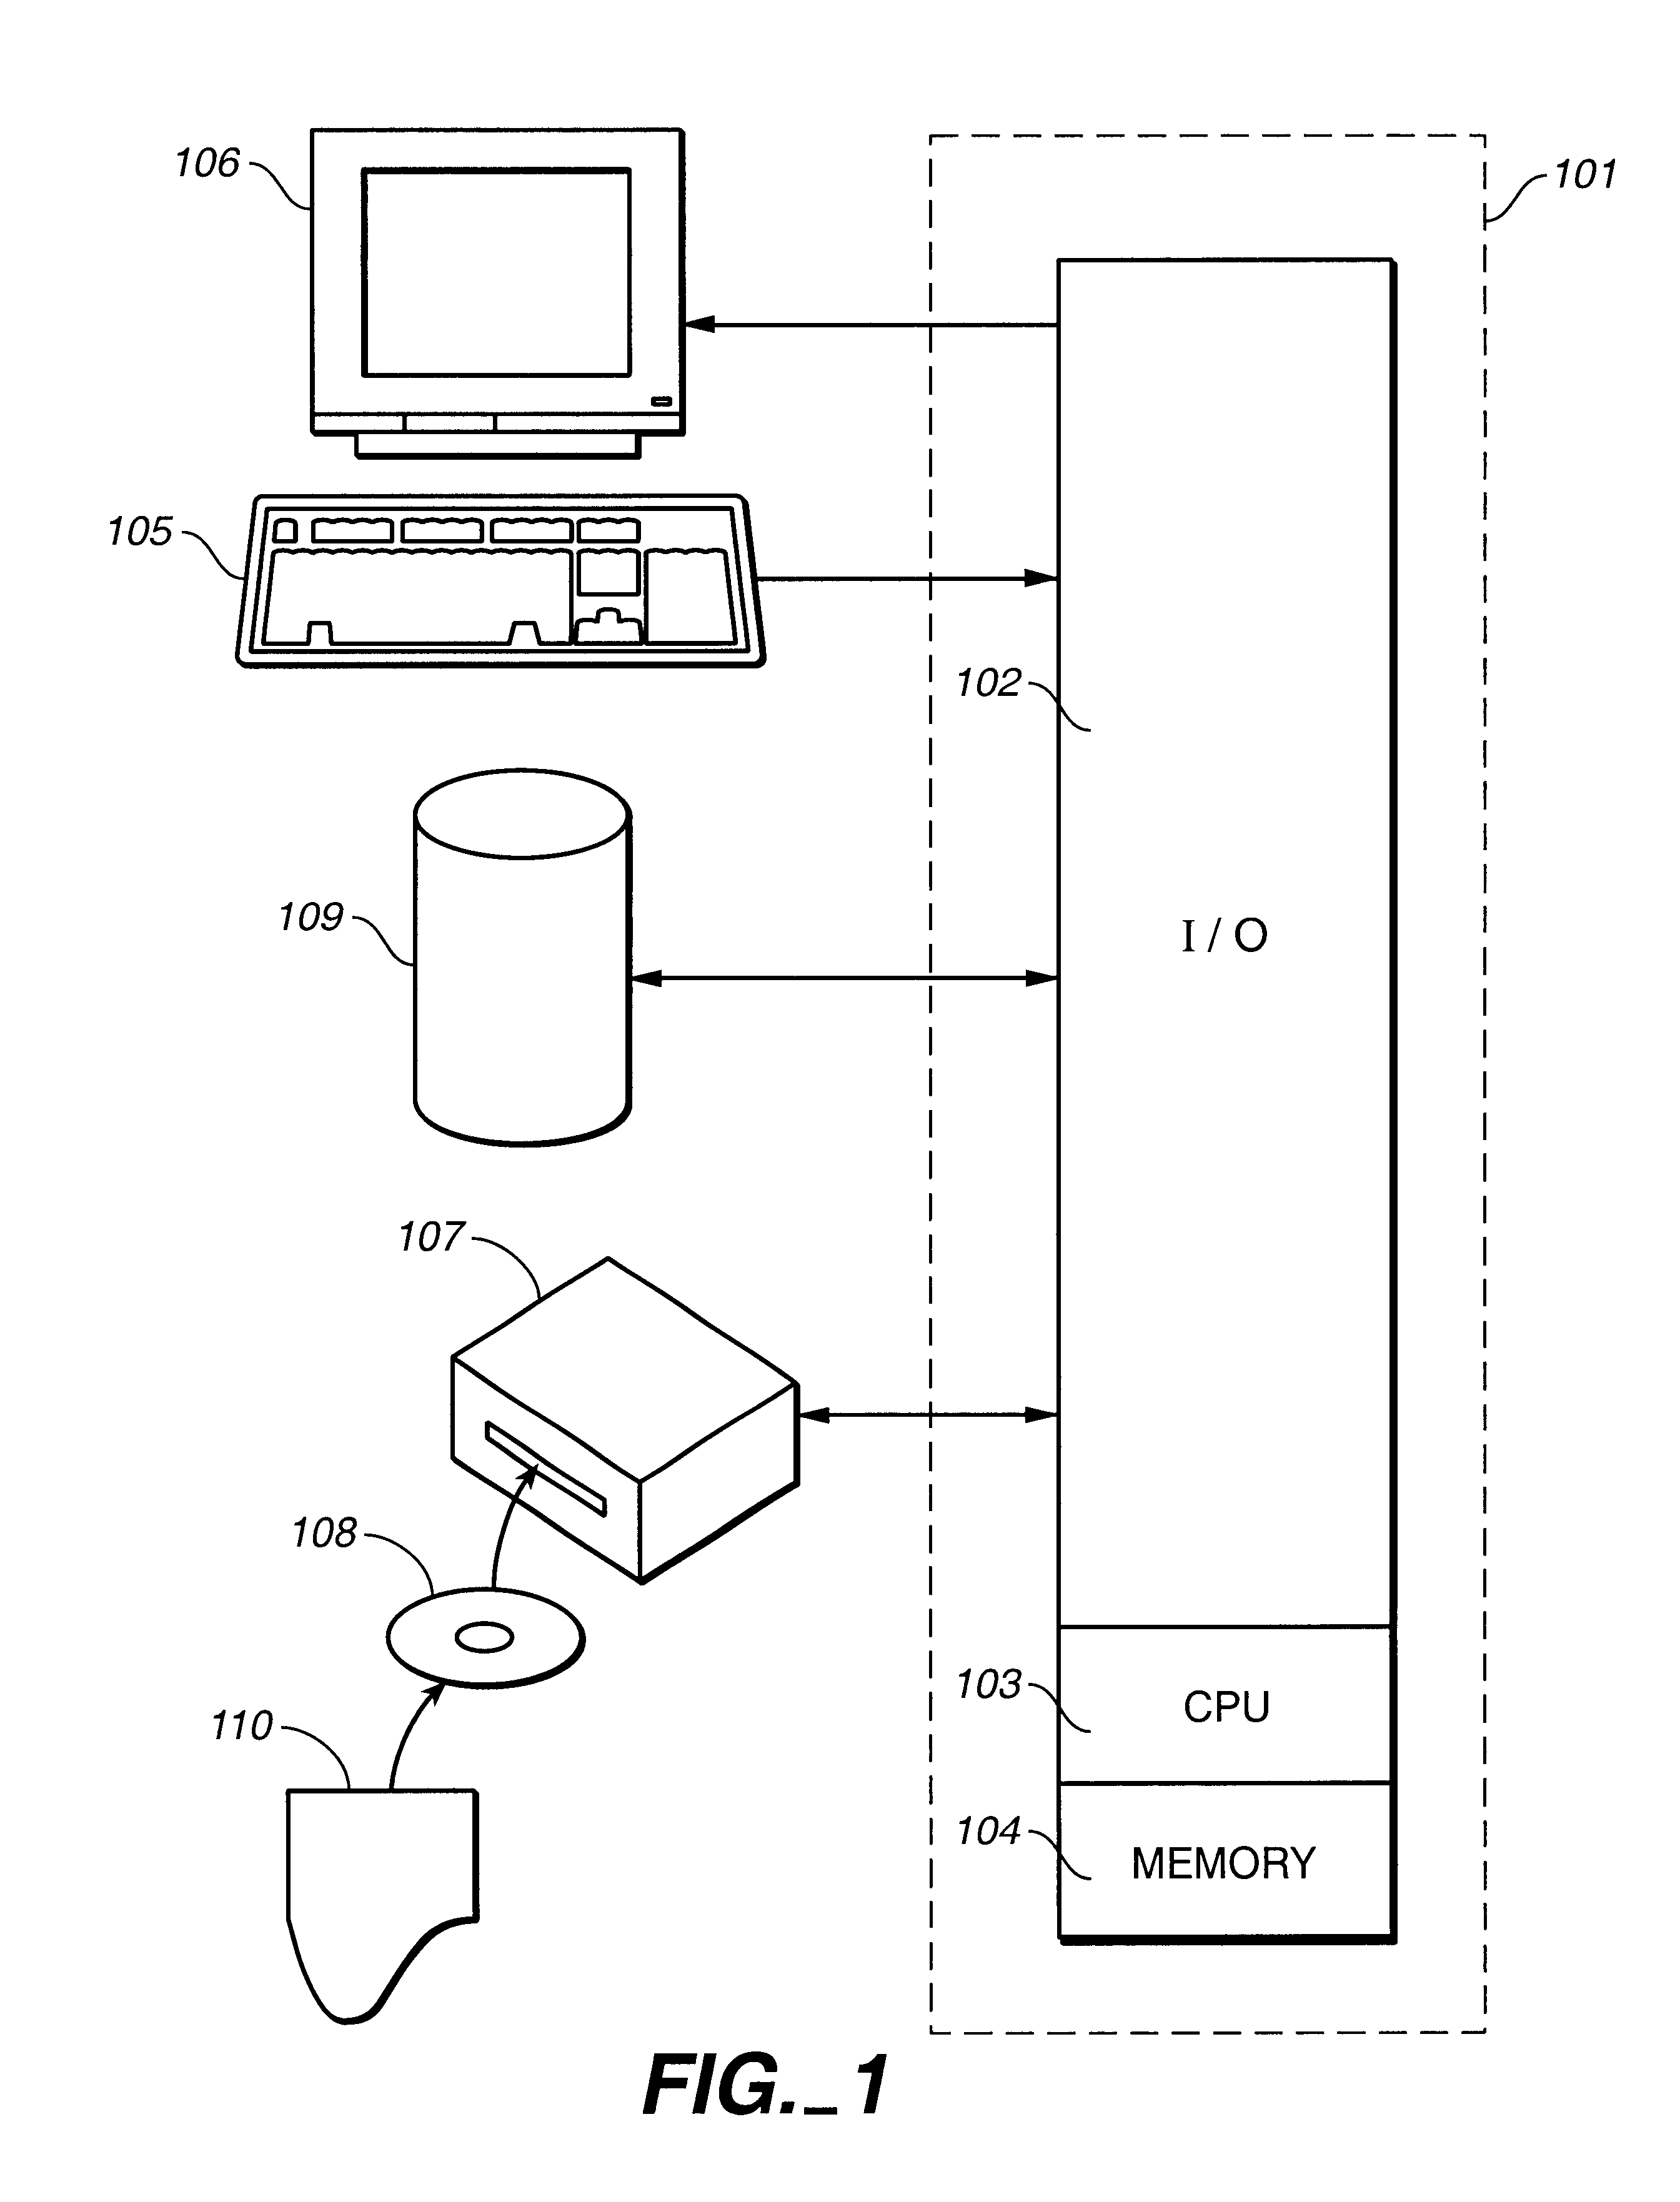 Modified design representation for fast fault simulation of an integrated circuit